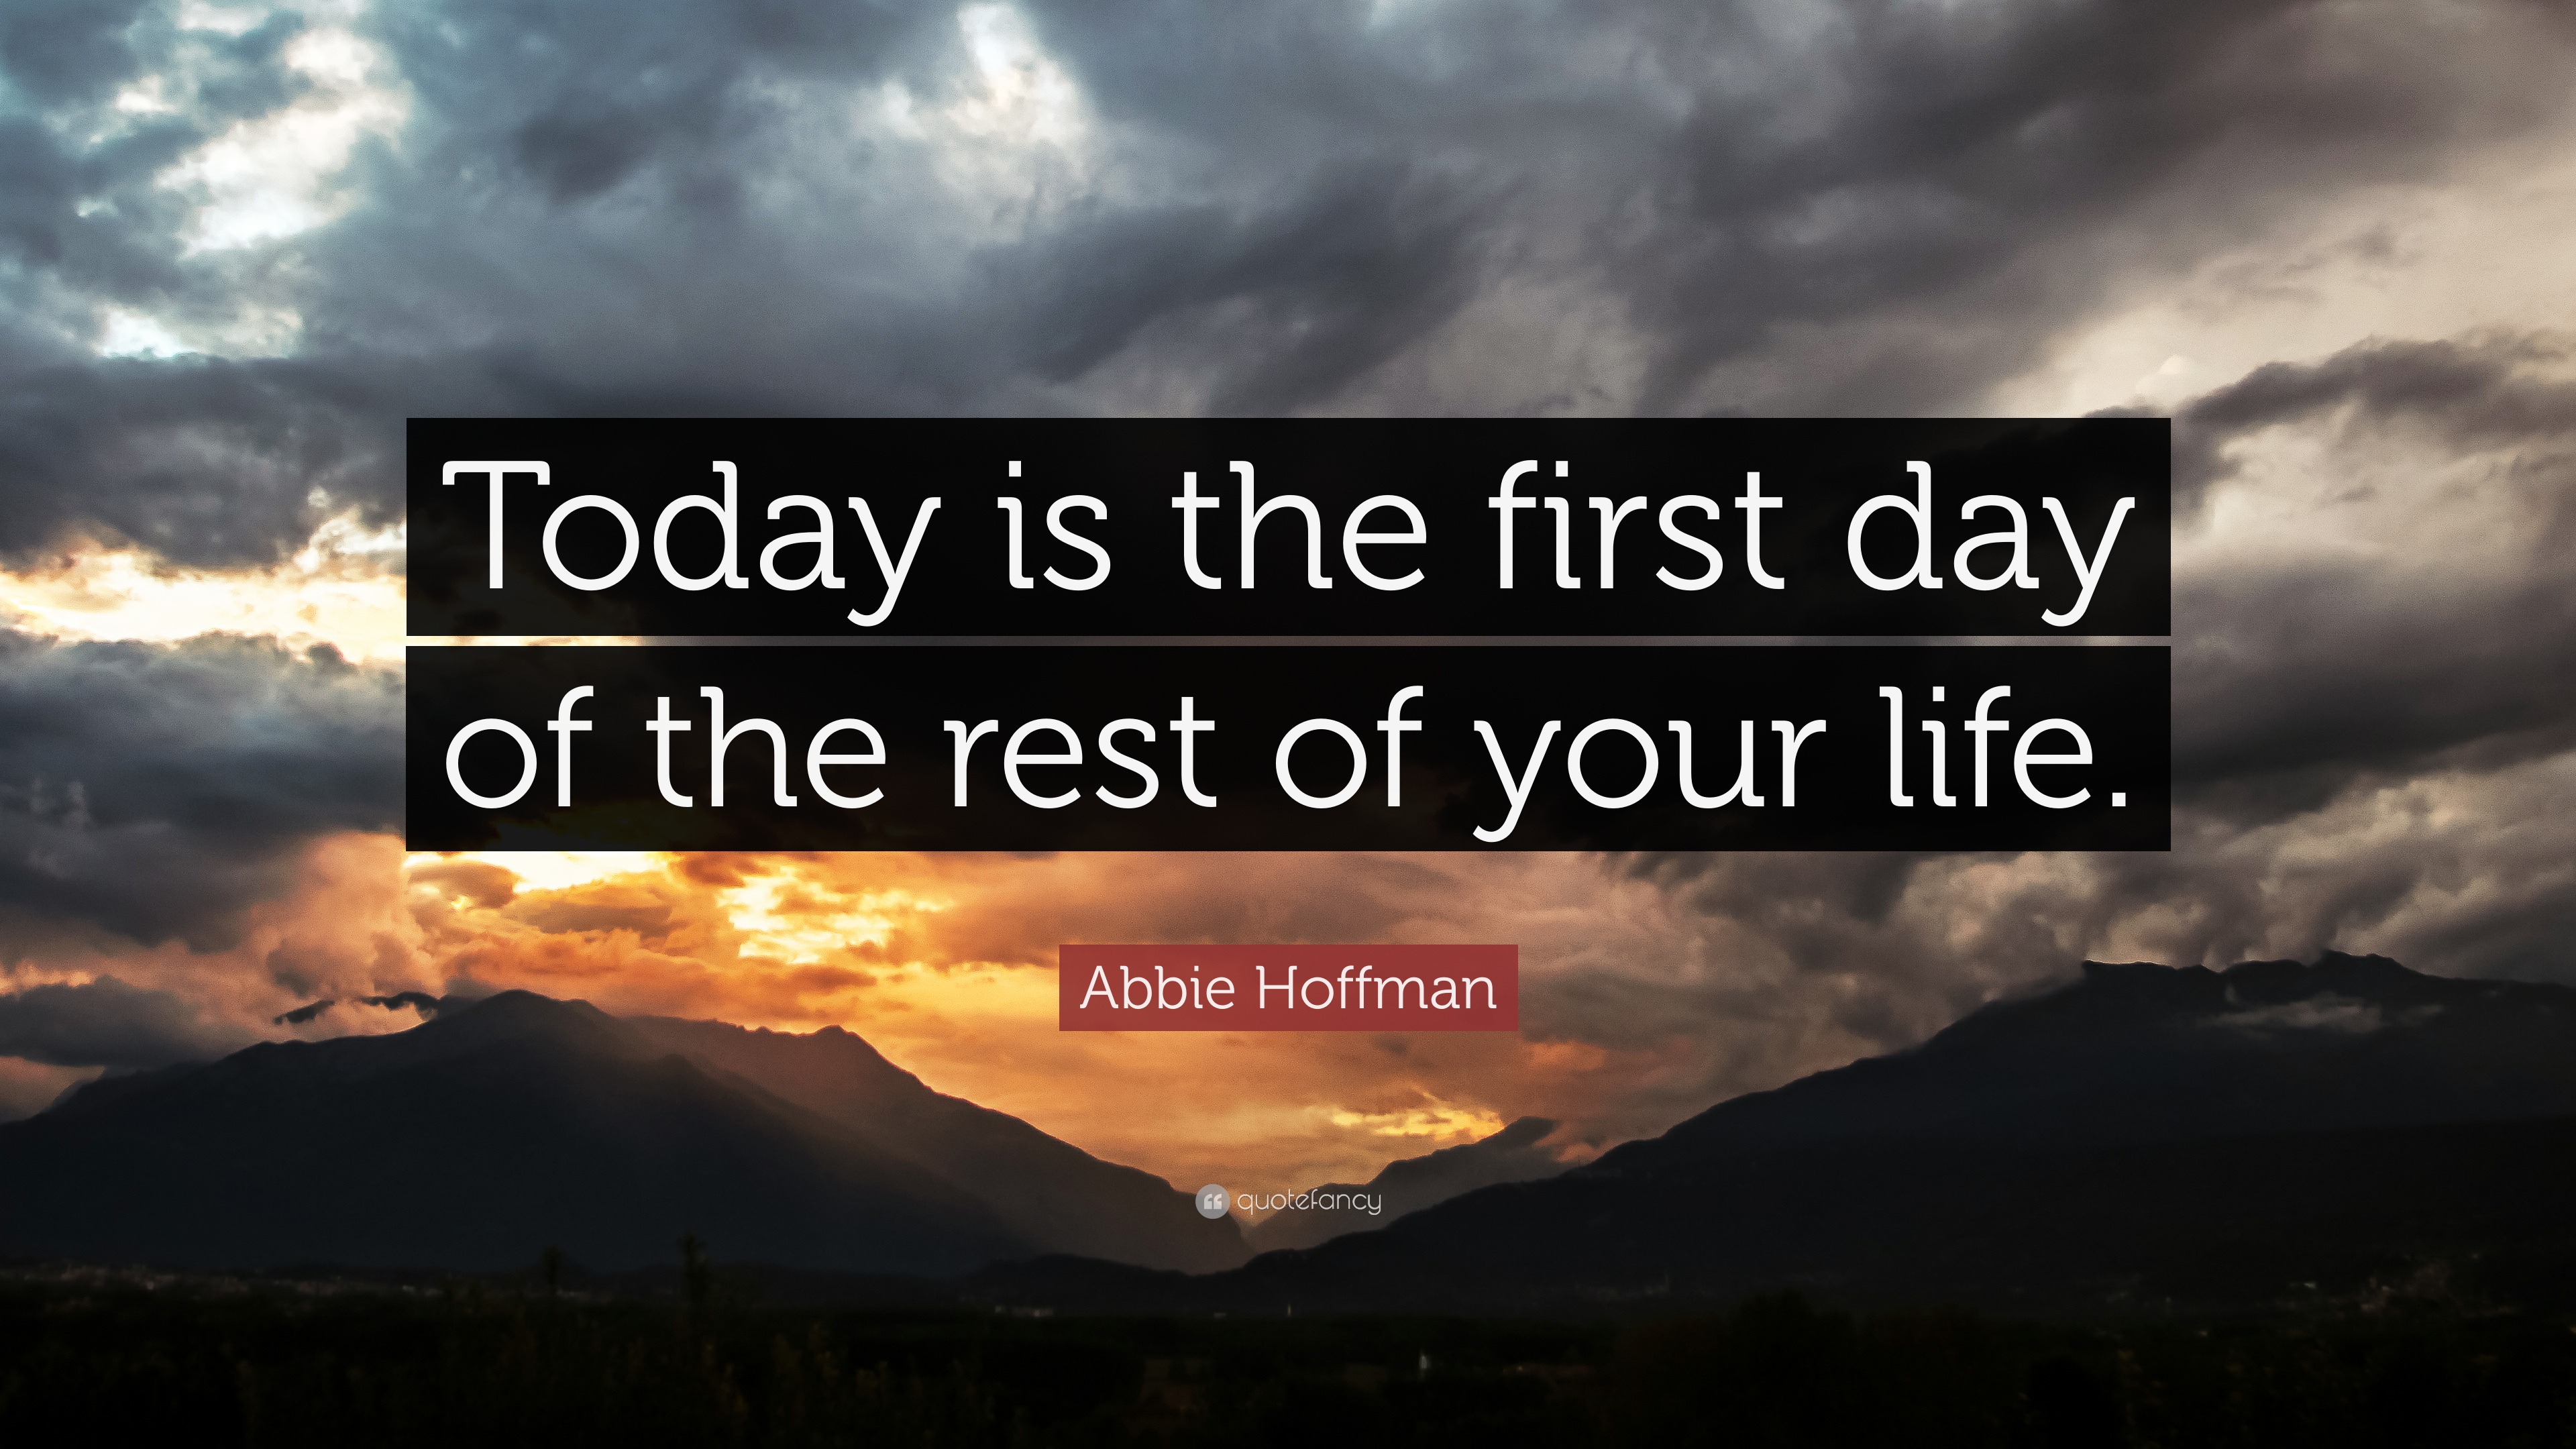 Abbie Hoffman Quote: “Today is the first day of the rest of your life ...